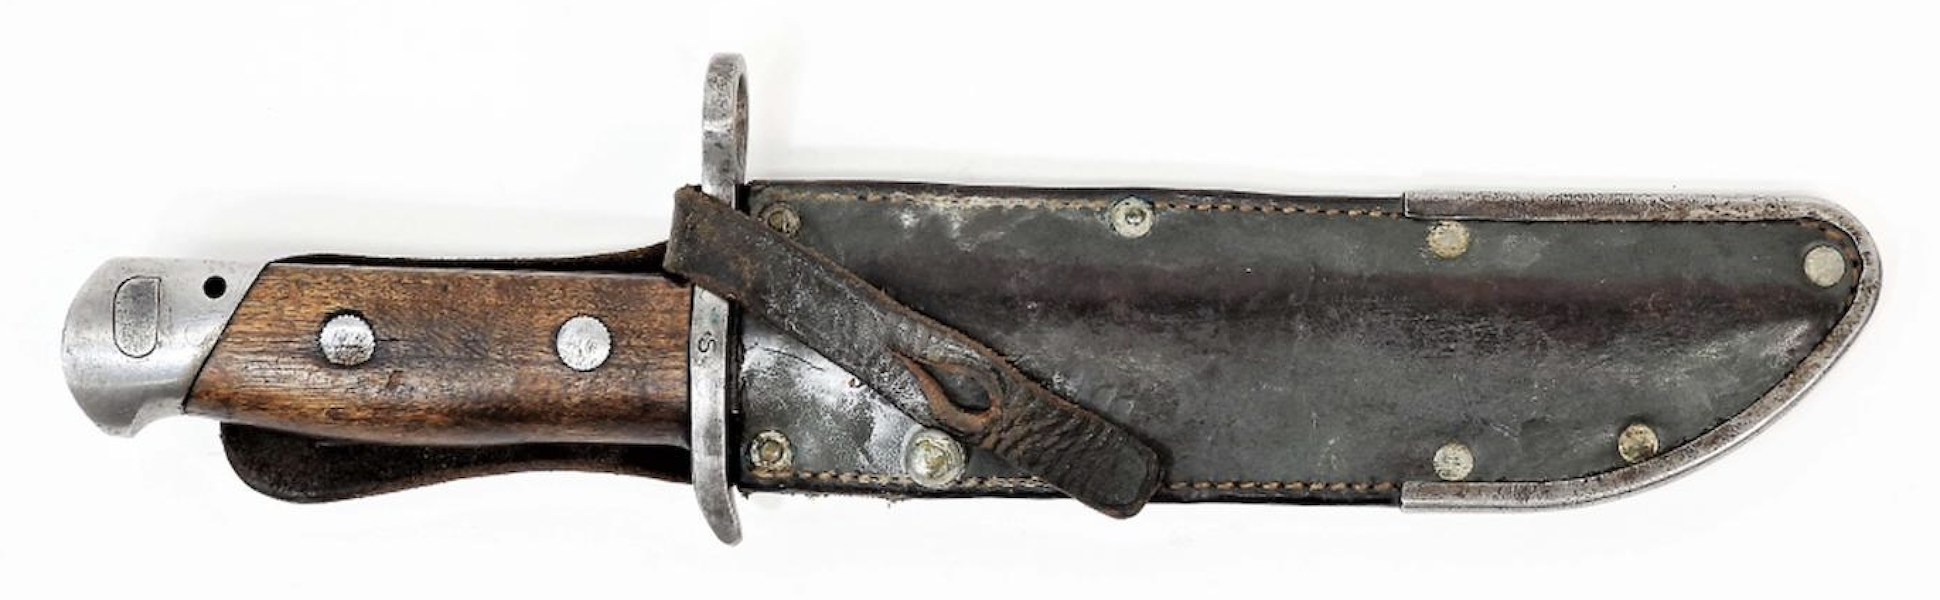  Finnish model 39 bayonet and scabbard, estimated at $200-$400